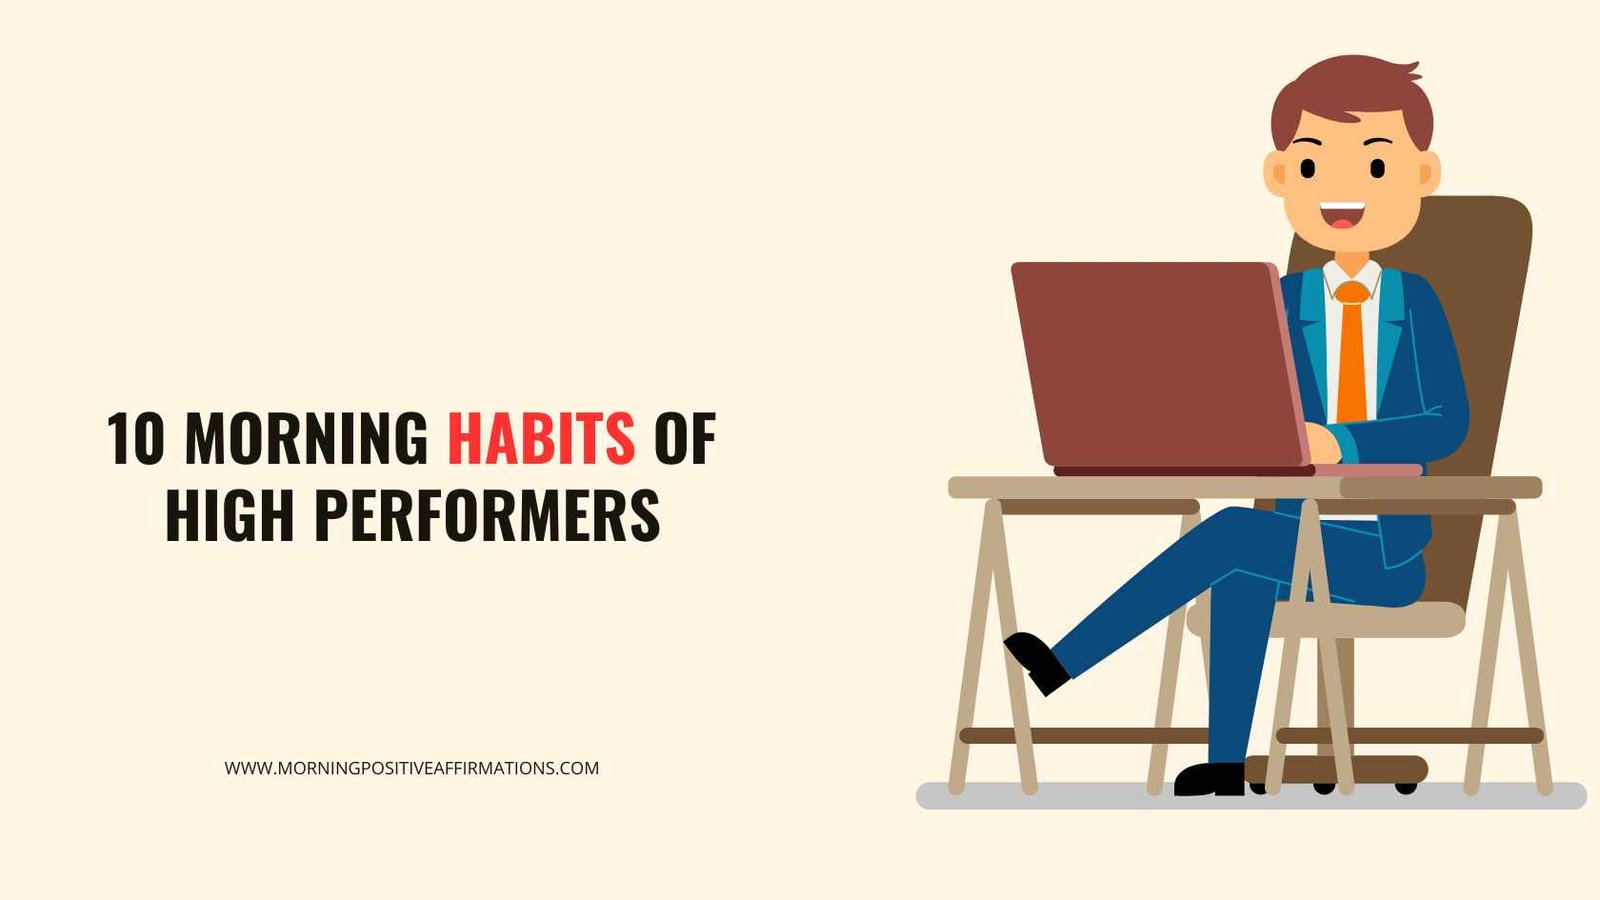 Morning Habits of High Performers